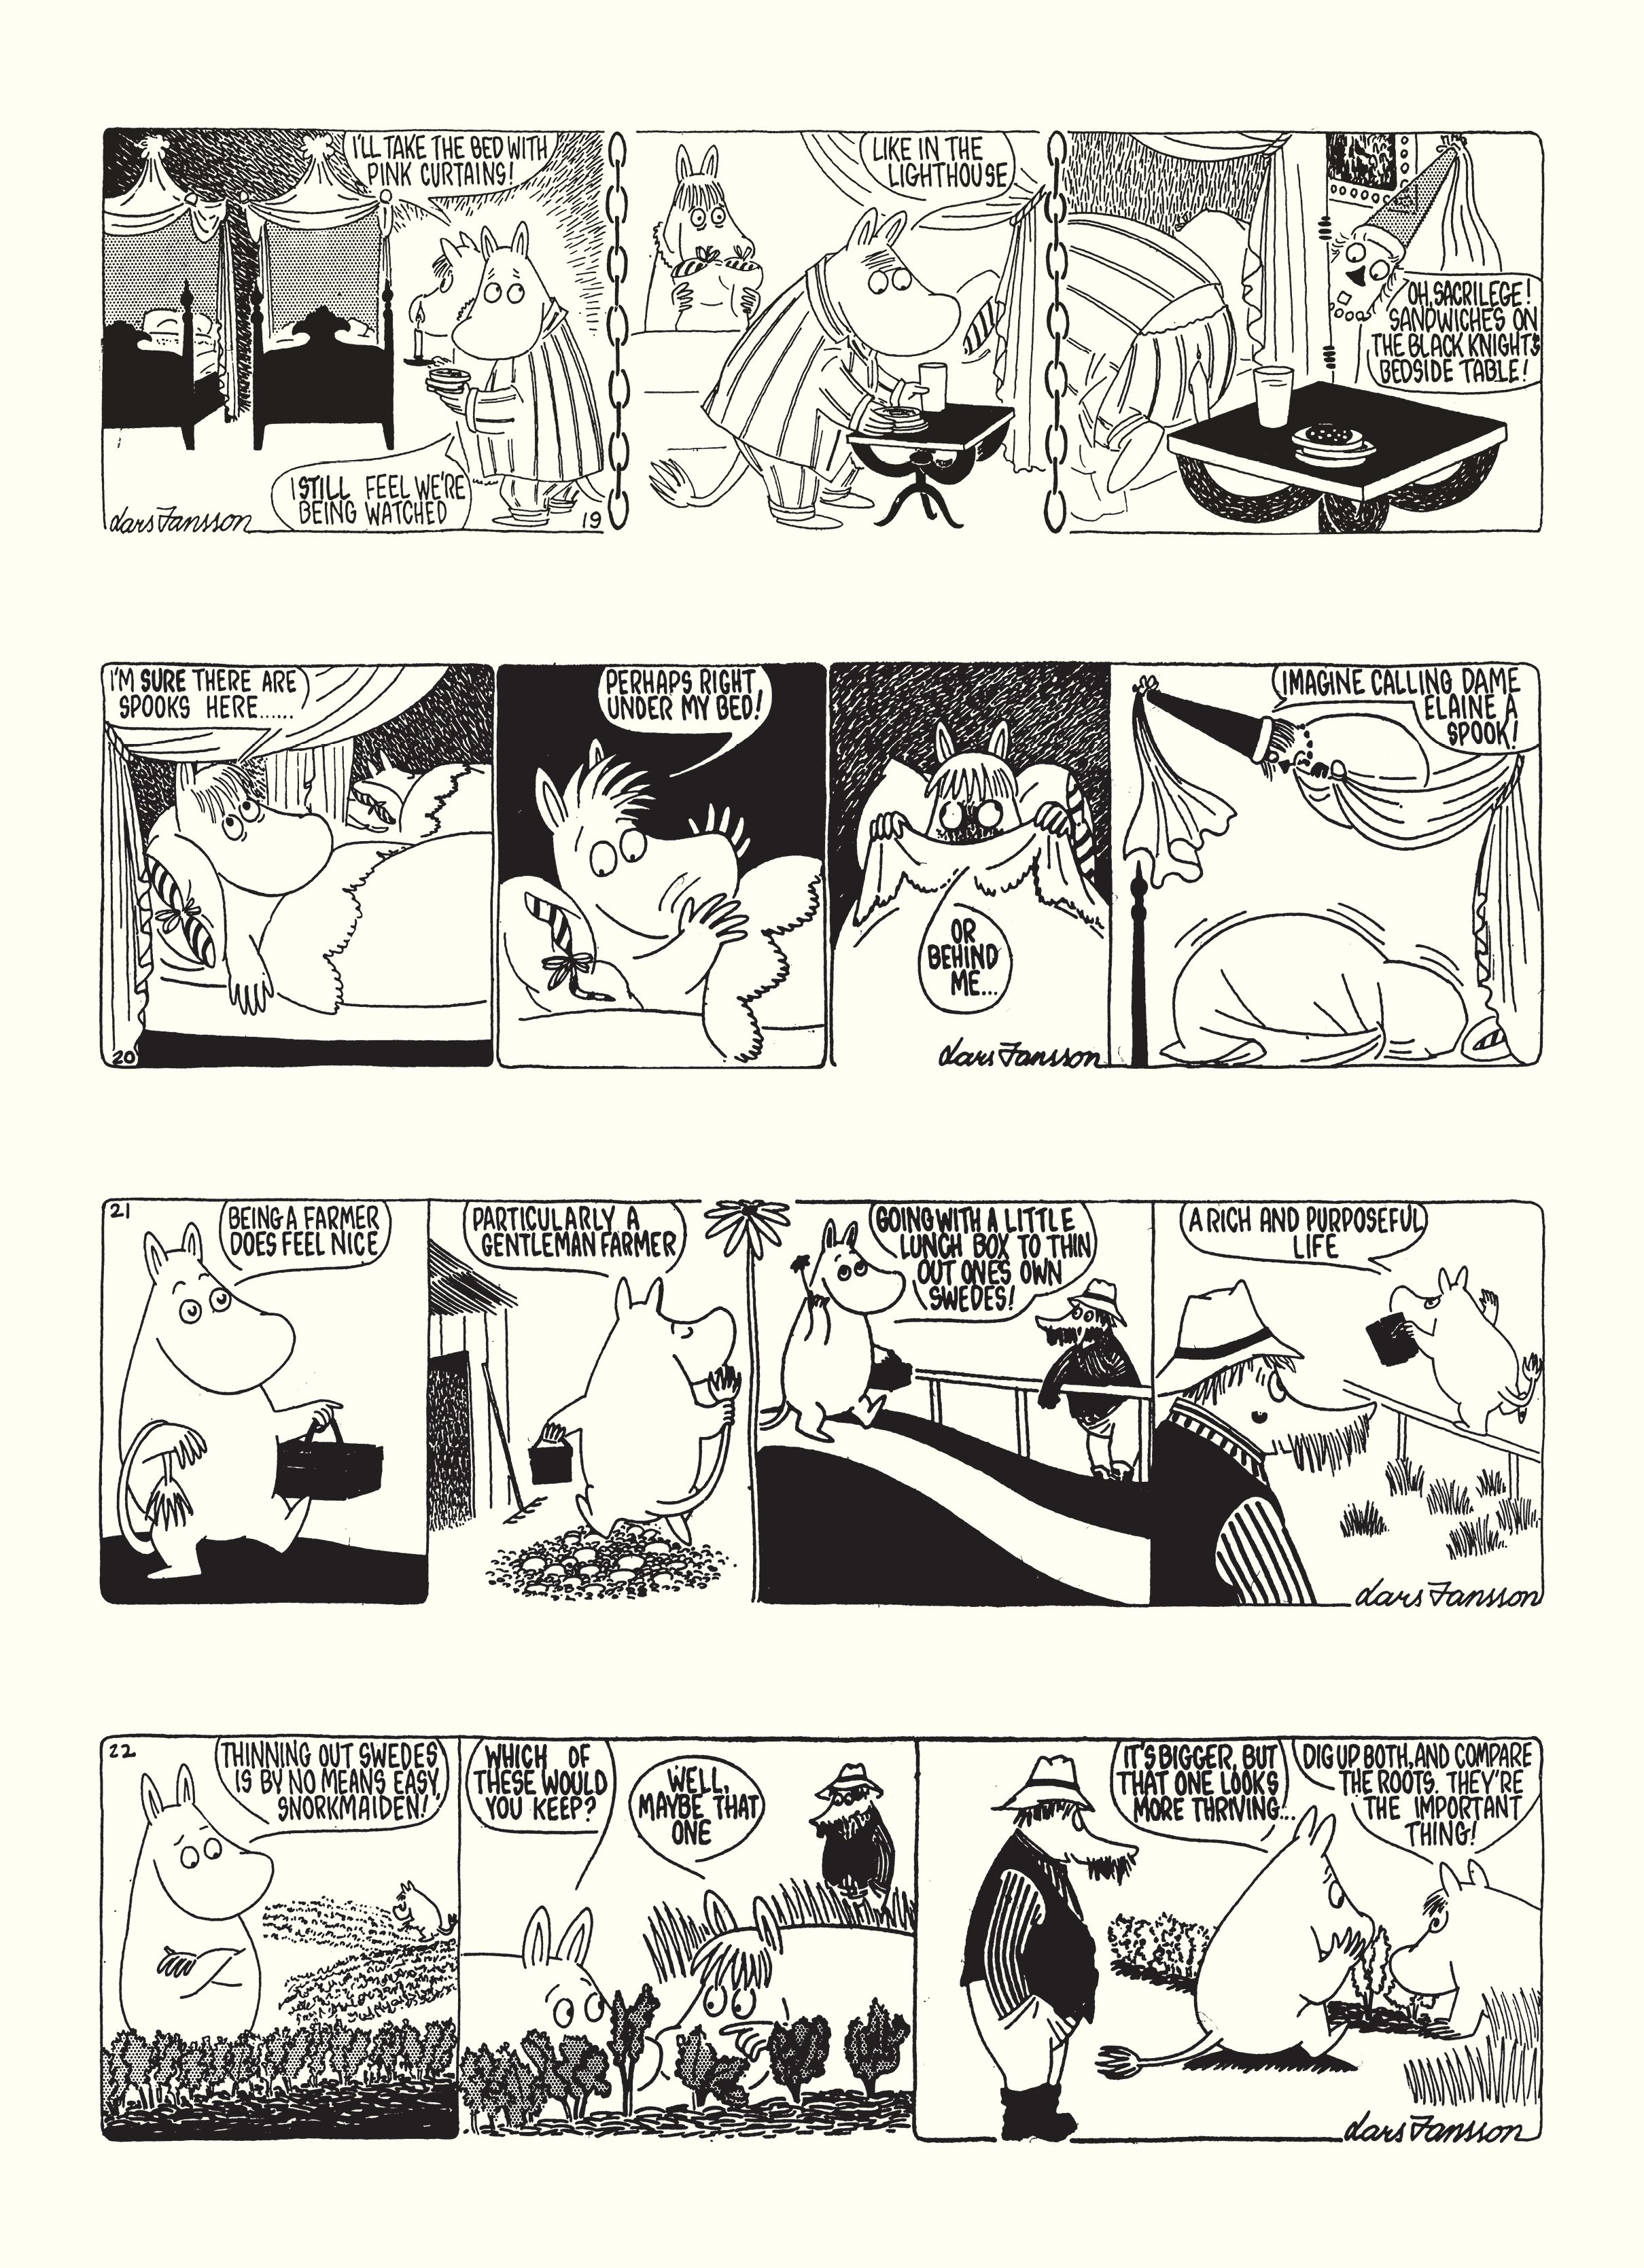 Read online Moomin: The Complete Lars Jansson Comic Strip comic -  Issue # TPB 7 - 53